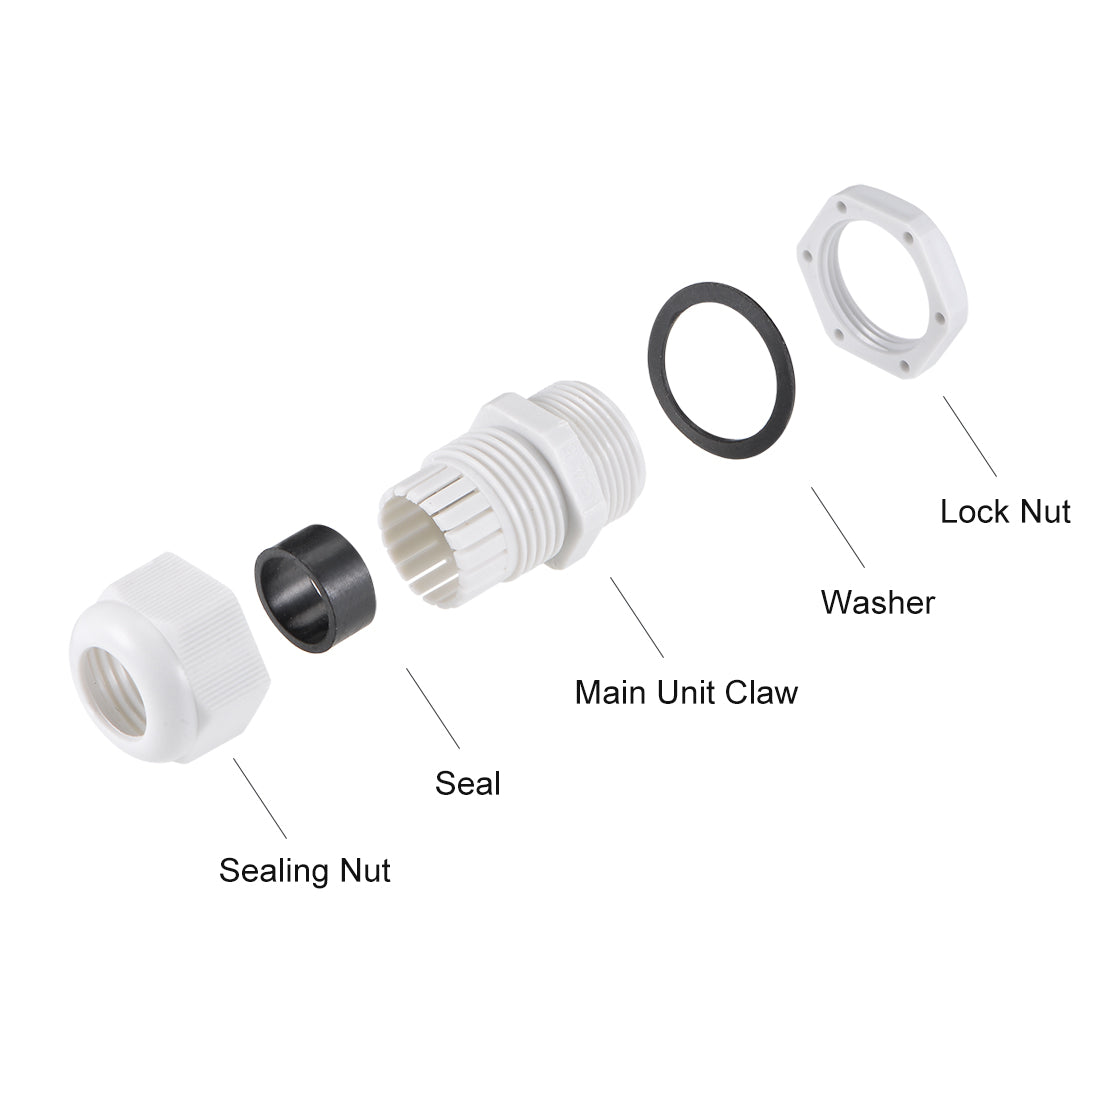 uxcell Uxcell M24x1.5 Cable Gland 12mm-15mm Wire Hole Waterproof Nylon Joint Adjustable Locknut with Washer White 10pcs